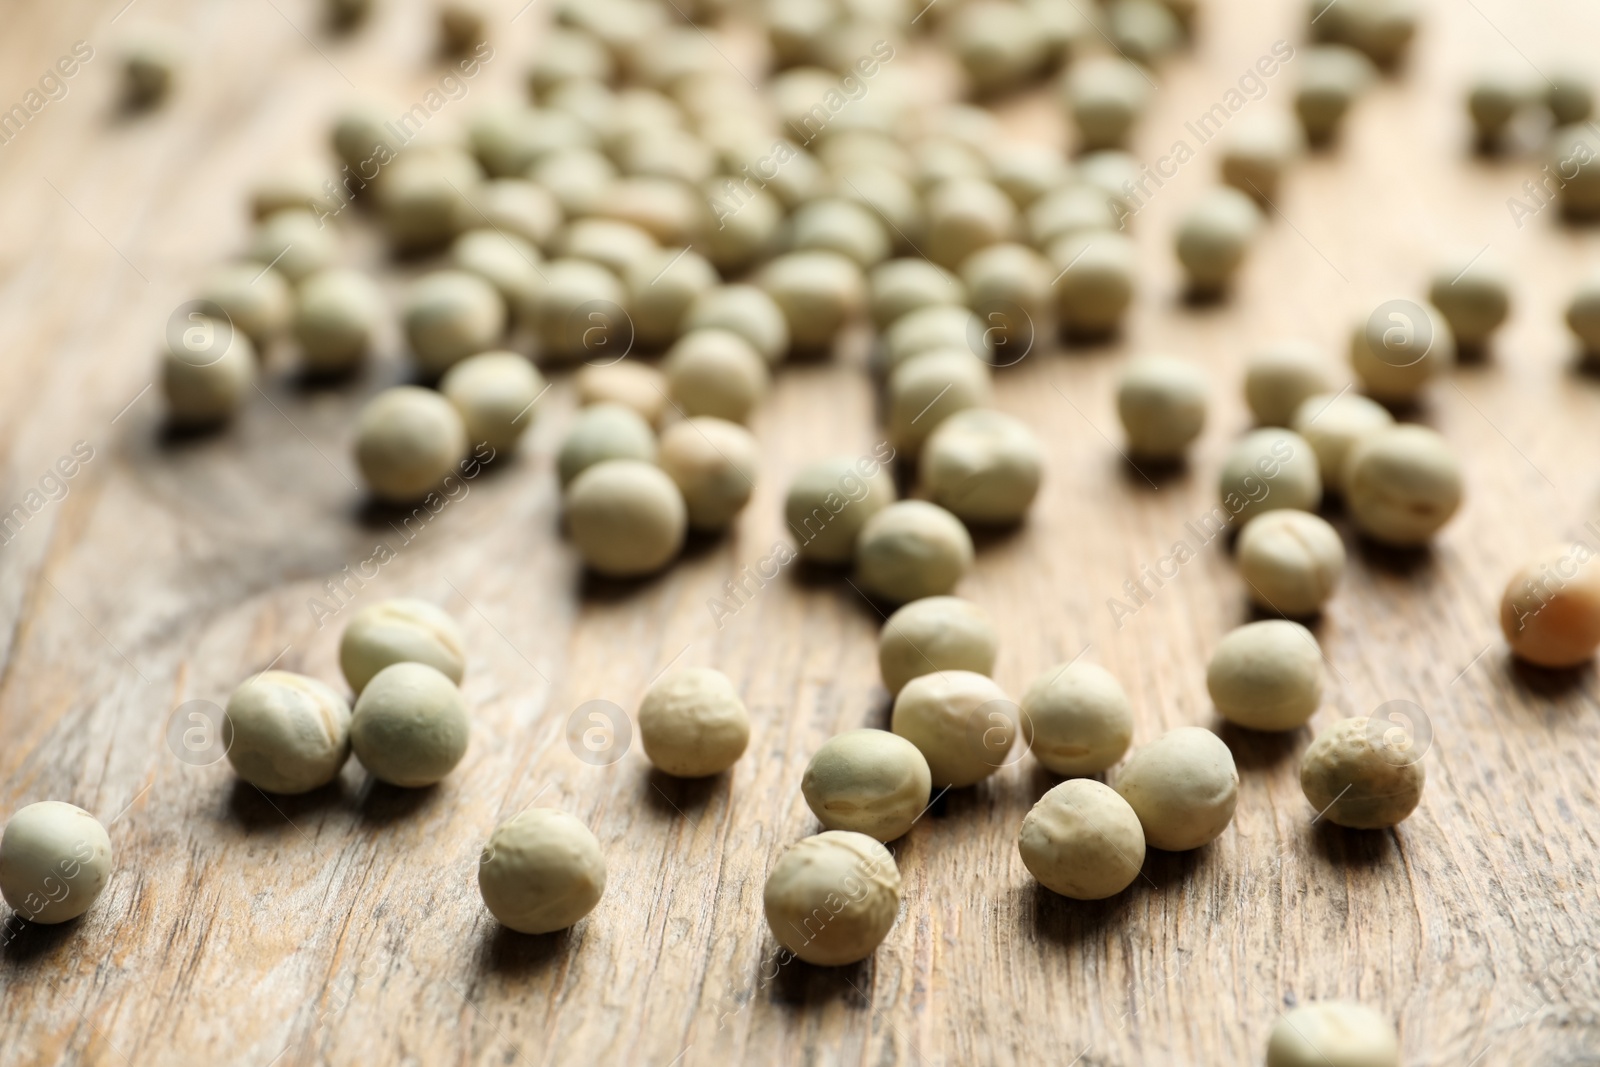 Photo of Raw dry peas on wooden background, closeup. Vegetable seeds